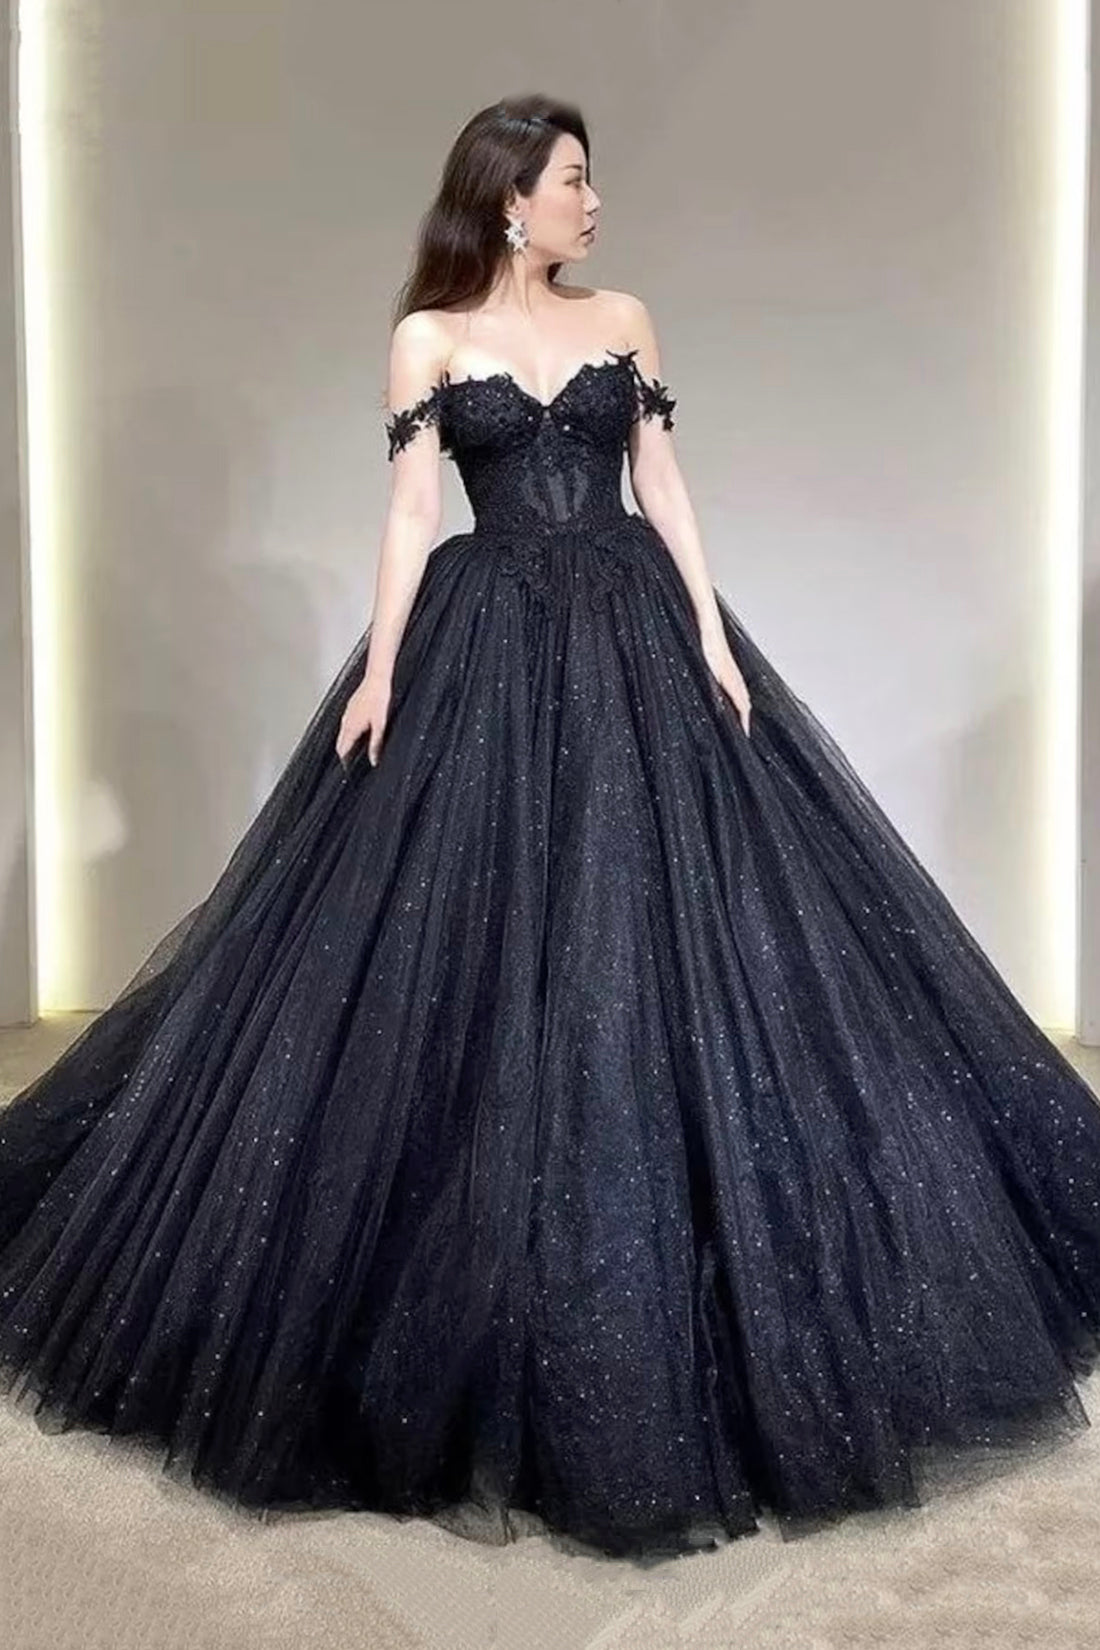 Princess Black Ruffles Quinceanera Dresses Sweet 15 16 Prom Party Ball Gowns  | eBay